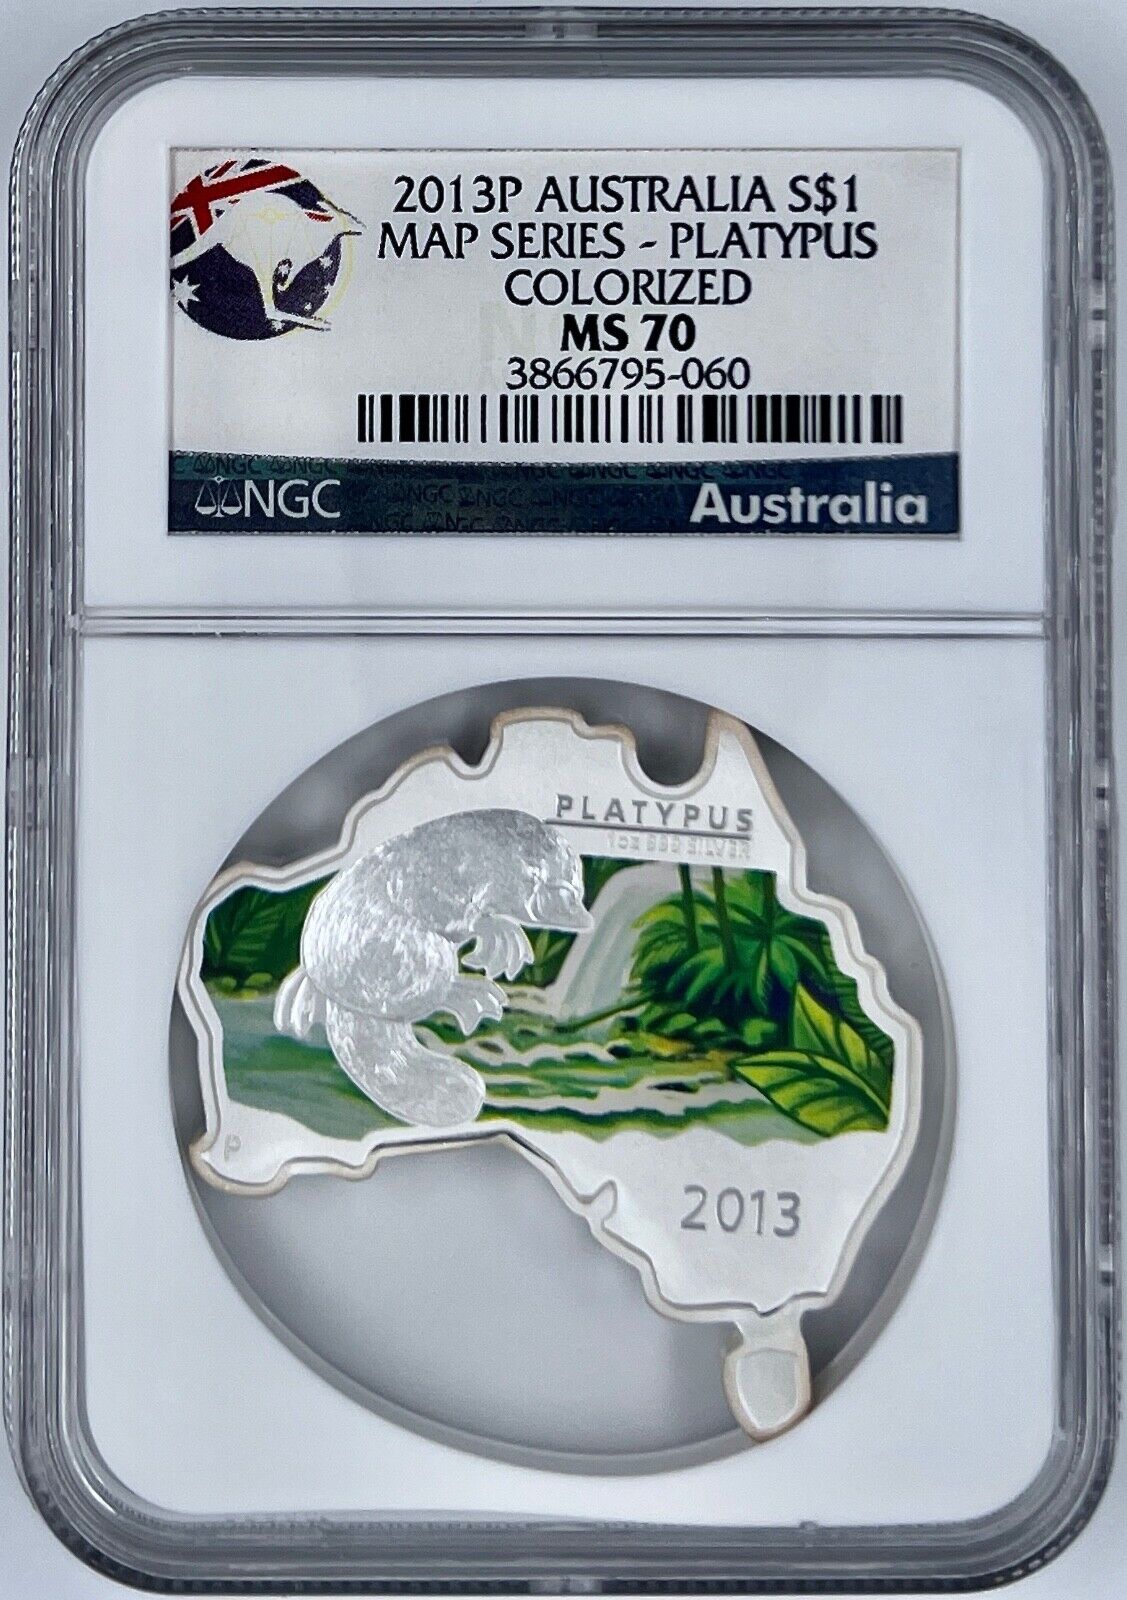 2013-P Australia $1 Map Series Platypus Colorized Silver Coin NGC MS 70 .999